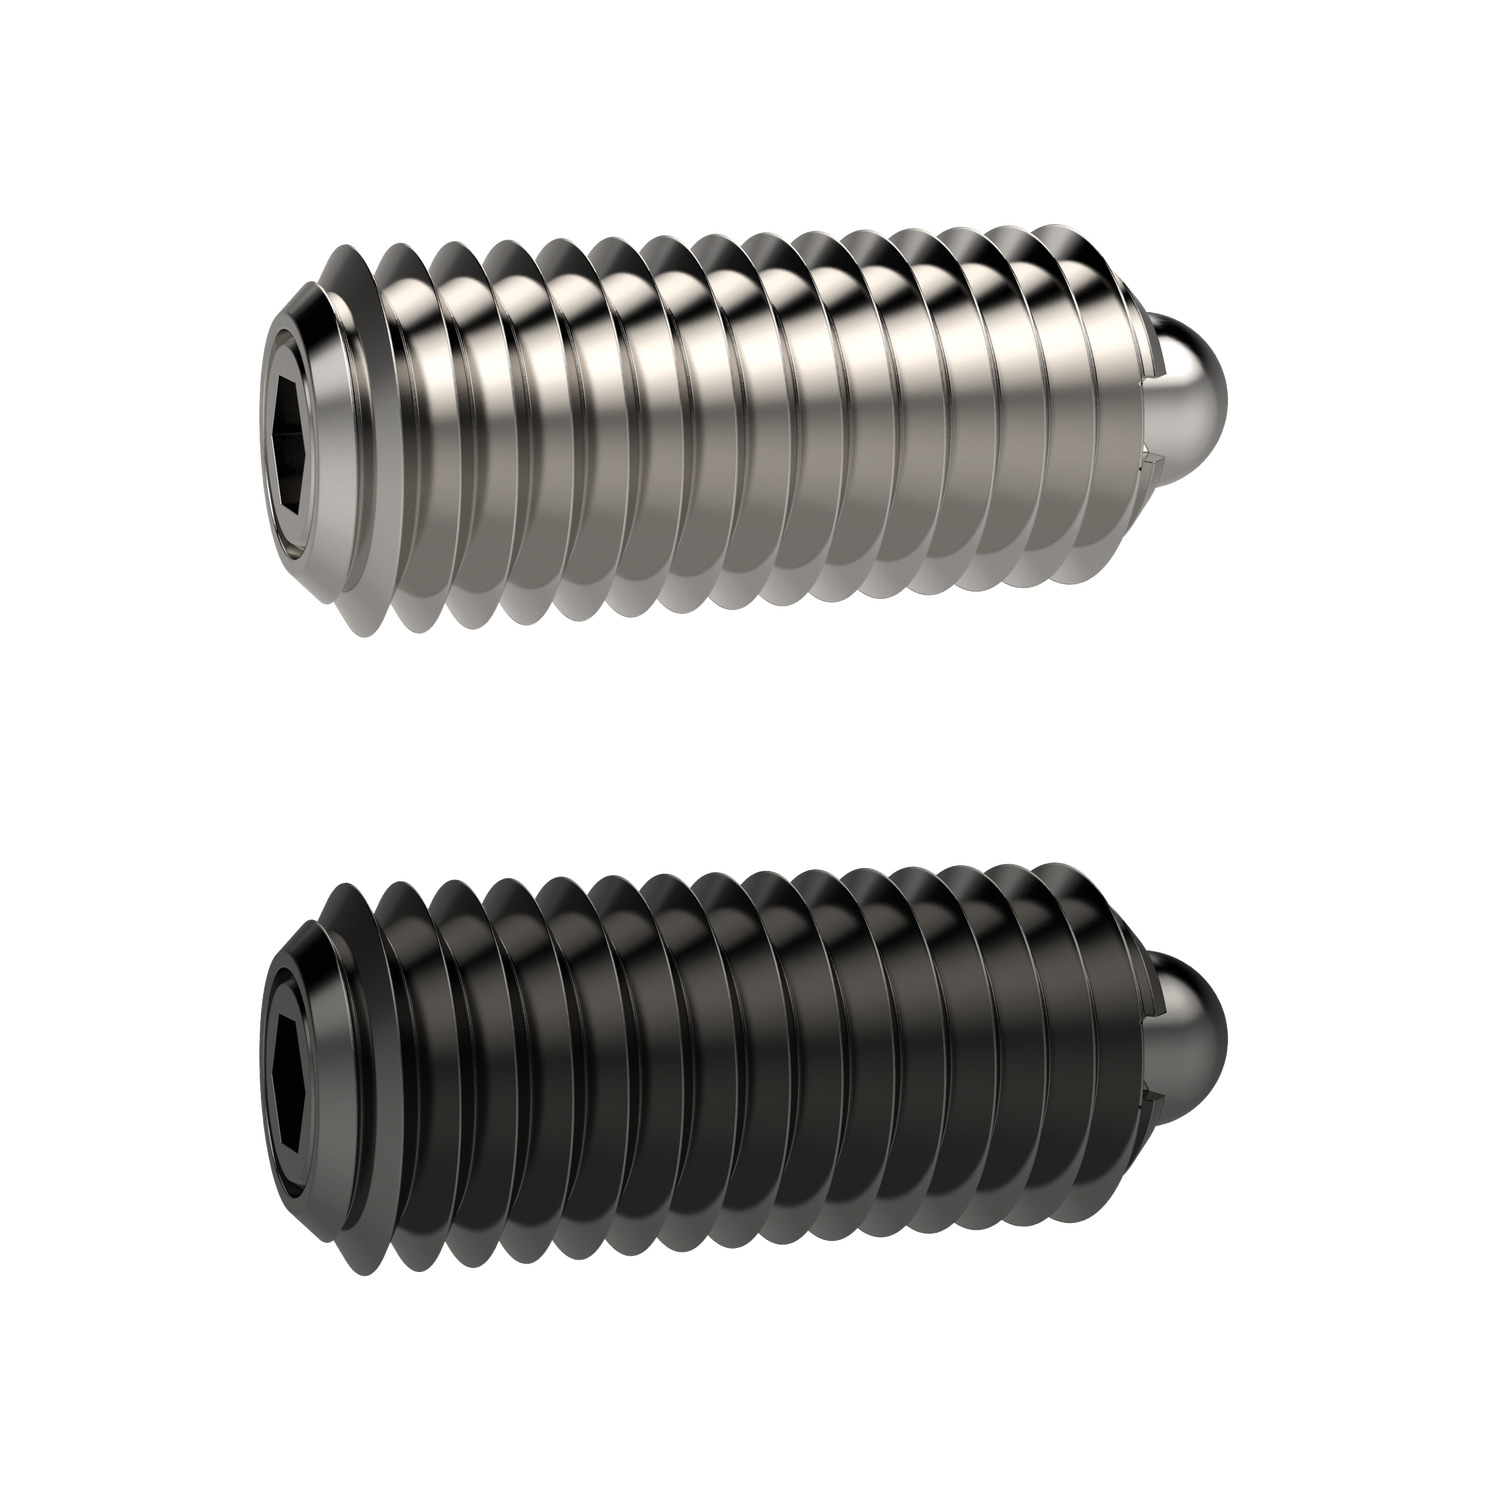 Spring Plungers Can be used for location, applying pressure or lifting off applications. It incorporates a seal around the pin to prevent liquids penetrating the spring plunger internally.